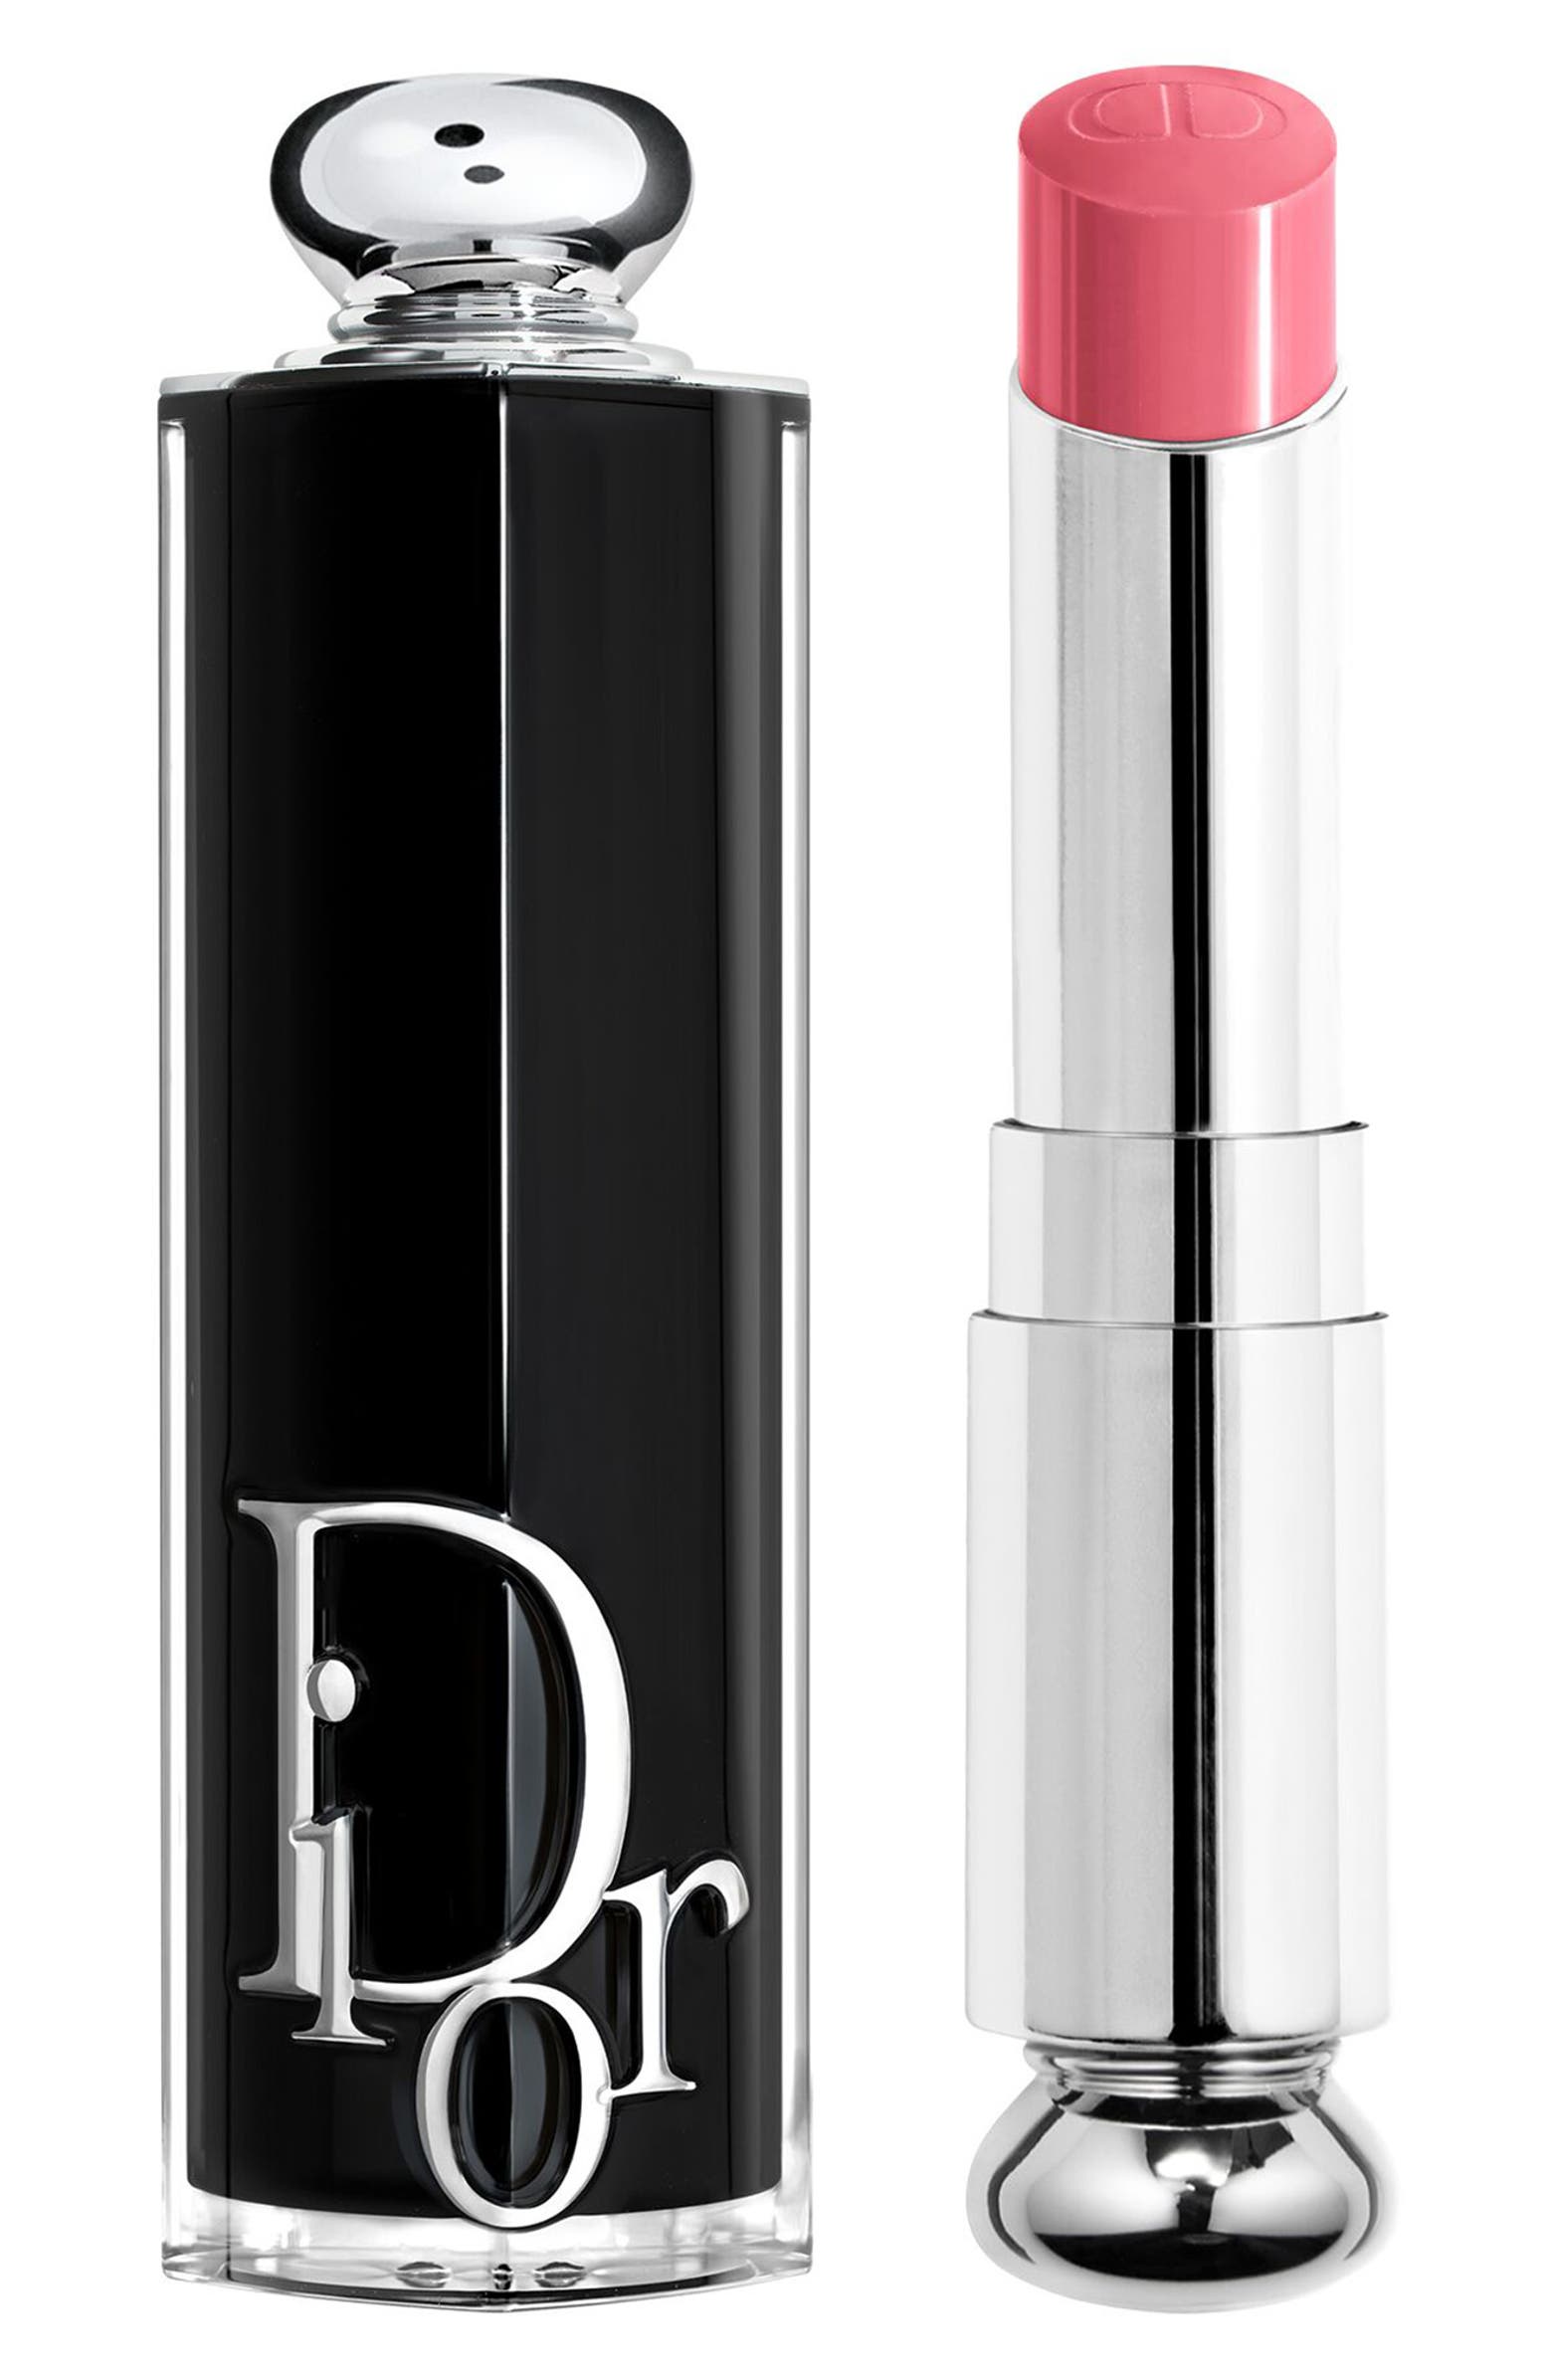 Best Color Lipsticks To Wear With A Black Dress: Blush pink lipstick from Dior